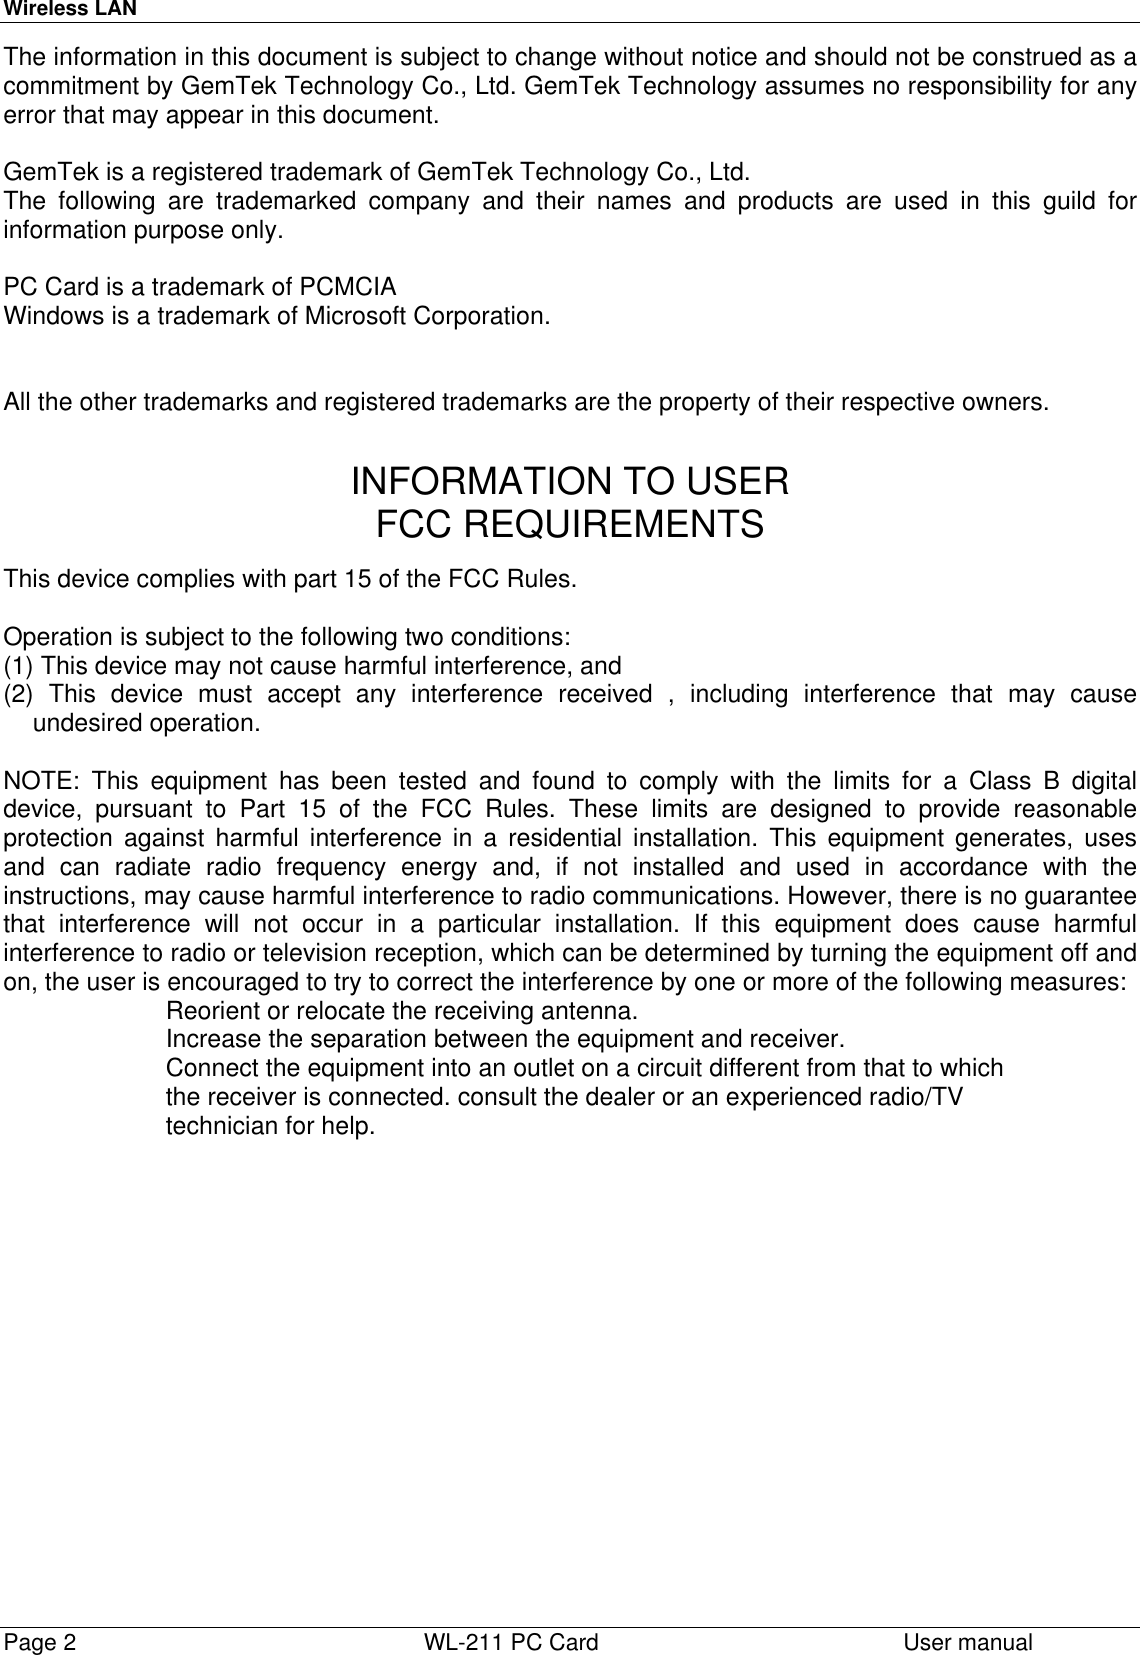 Wireless LANPage 2   WL-211 PC Card User manualThe information in this document is subject to change without notice and should not be construed as acommitment by GemTek Technology Co., Ltd. GemTek Technology assumes no responsibility for anyerror that may appear in this document.GemTek is a registered trademark of GemTek Technology Co., Ltd.The following are trademarked company and their names and products are used in this guild forinformation purpose only.PC Card is a trademark of PCMCIAWindows is a trademark of Microsoft Corporation.All the other trademarks and registered trademarks are the property of their respective owners.INFORMATION TO USERFCC REQUIREMENTSThis device complies with part 15 of the FCC Rules.Operation is subject to the following two conditions:(1) This device may not cause harmful interference, and(2) This device must accept any interference received , including interference that may causeundesired operation.NOTE: This equipment has been tested and found to comply with the limits for a Class B digitaldevice, pursuant to Part 15 of the FCC Rules. These limits are designed to provide reasonableprotection against harmful interference in a residential installation. This equipment generates, usesand can radiate radio frequency energy and, if not installed and used in accordance with theinstructions, may cause harmful interference to radio communications. However, there is no guaranteethat interference will not occur in a particular installation. If this equipment does cause harmfulinterference to radio or television reception, which can be determined by turning the equipment off andon, the user is encouraged to try to correct the interference by one or more of the following measures:Reorient or relocate the receiving antenna.Increase the separation between the equipment and receiver.Connect the equipment into an outlet on a circuit different from that to whichthe receiver is connected. consult the dealer or an experienced radio/TVtechnician for help.